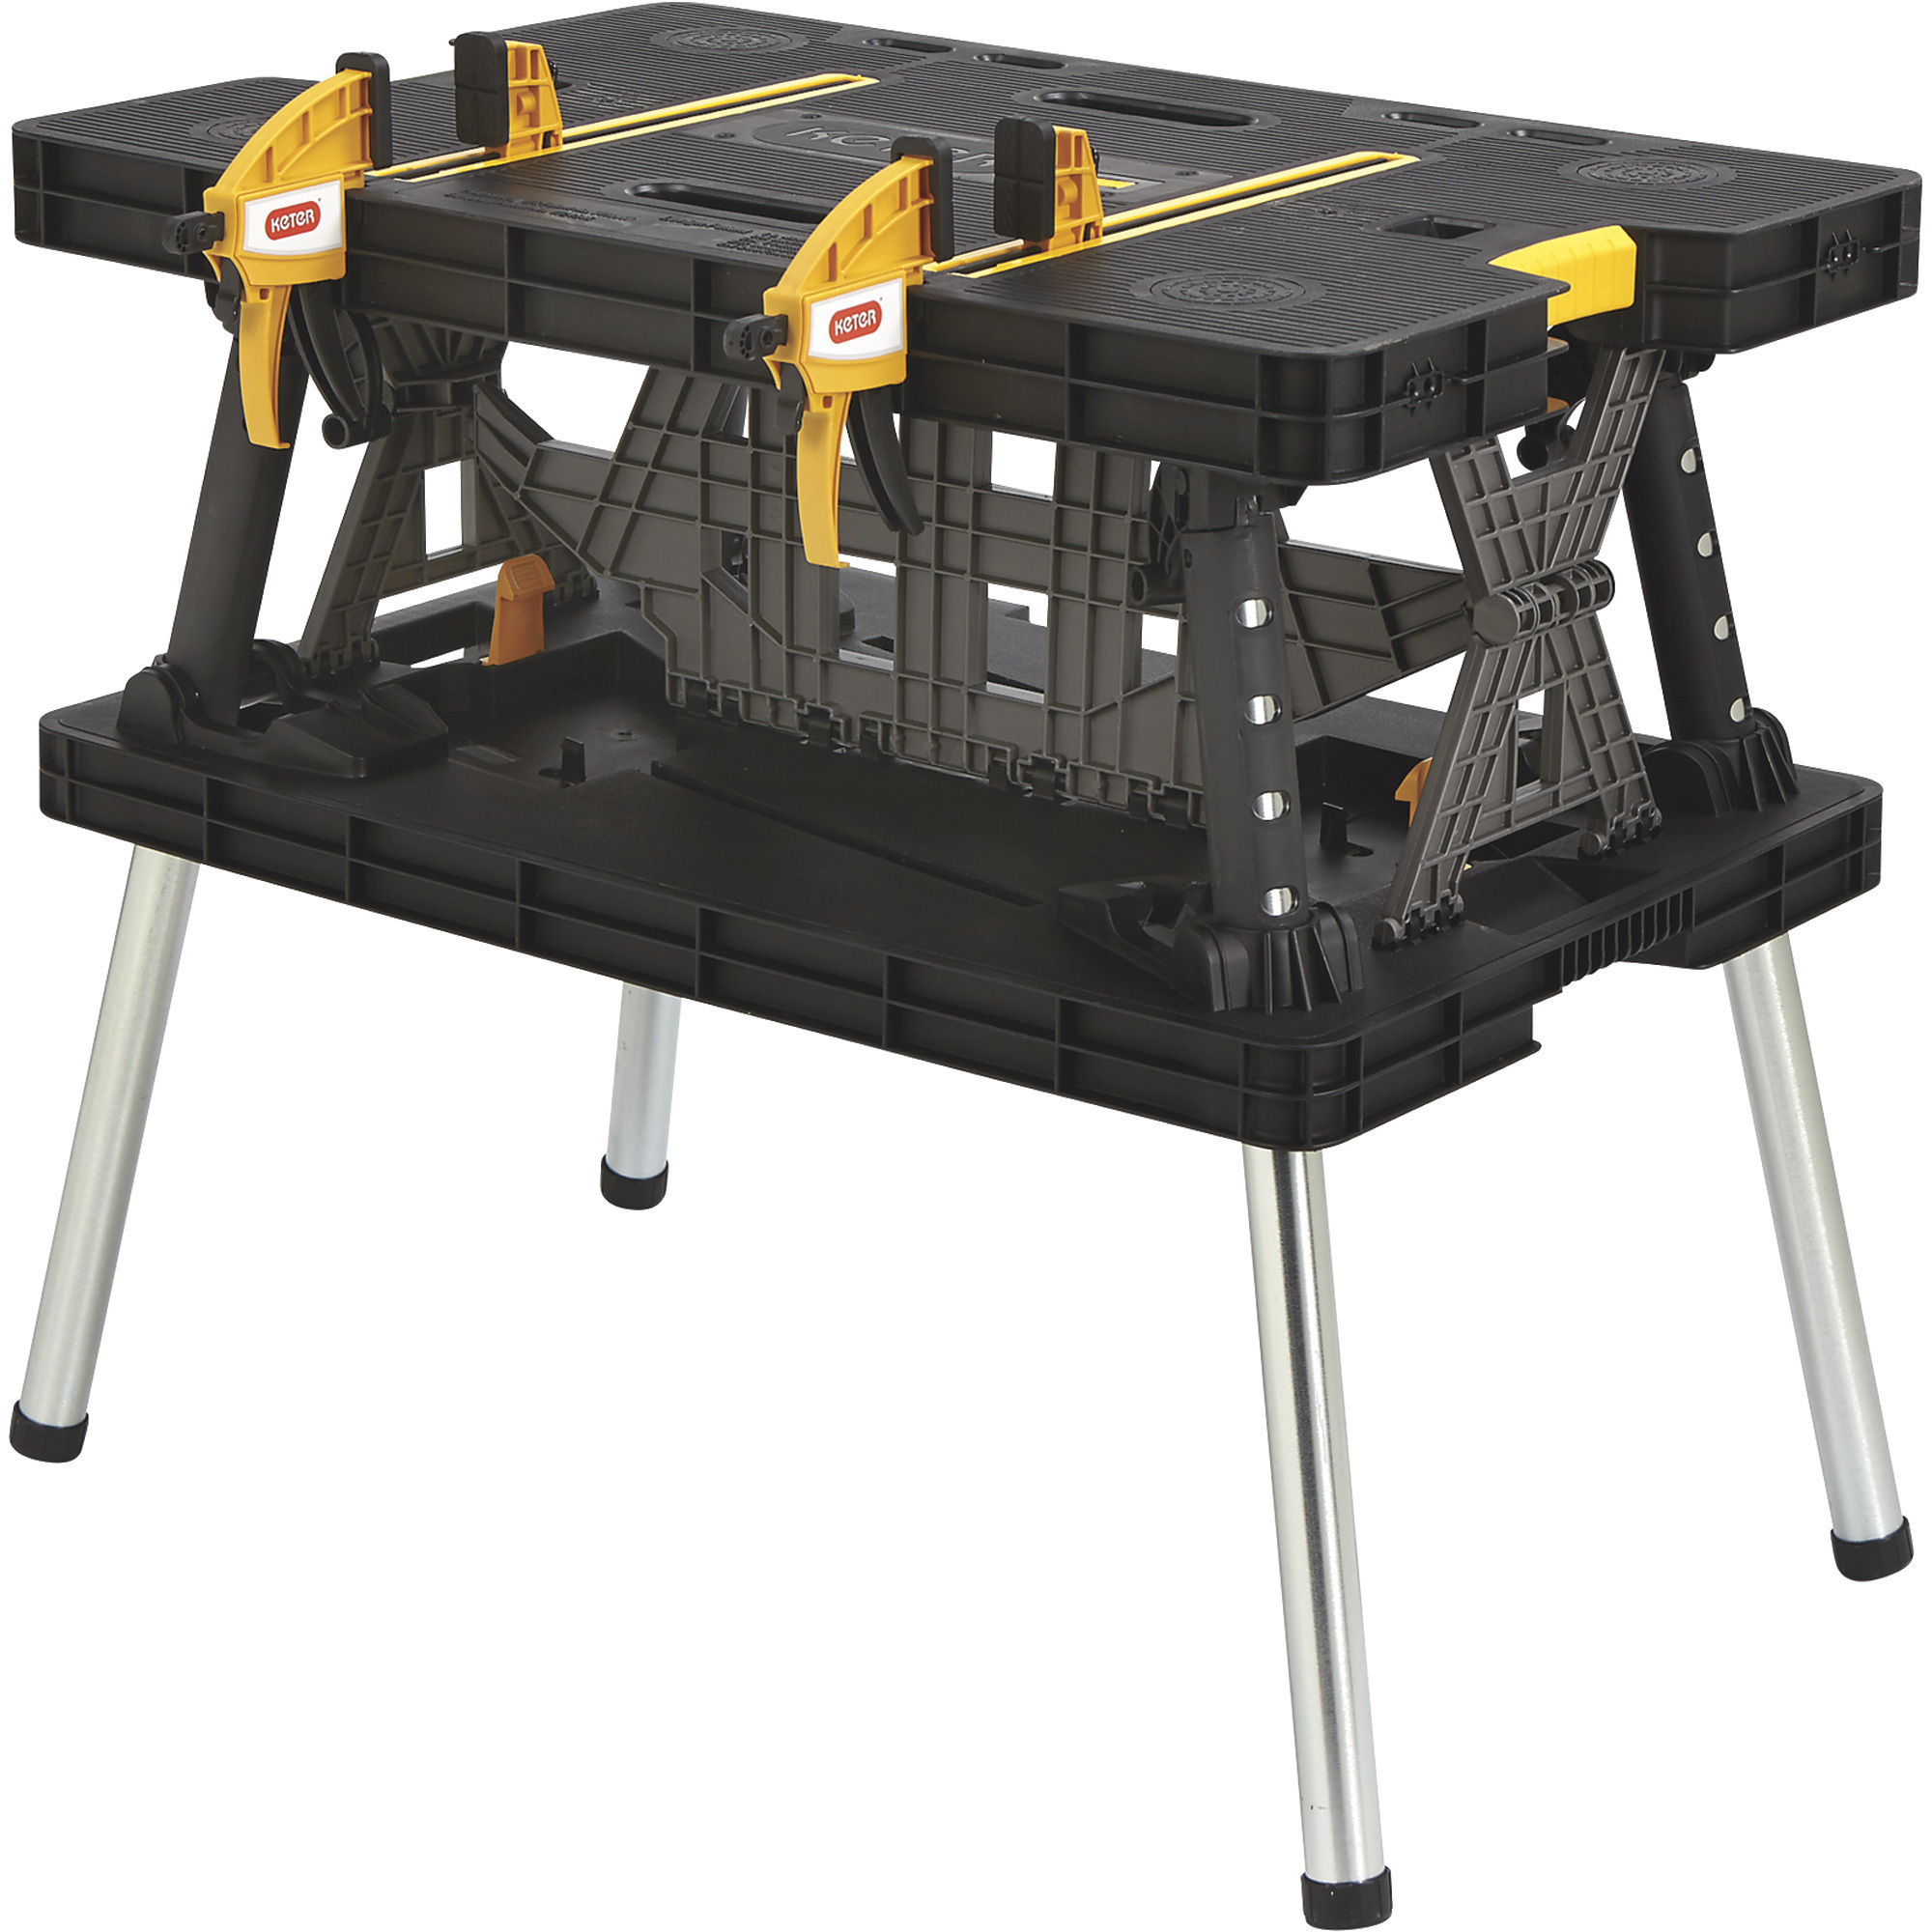 Keter 1000-Lb. Folding Work Table with Two Adjustable Clamps â Model 252638